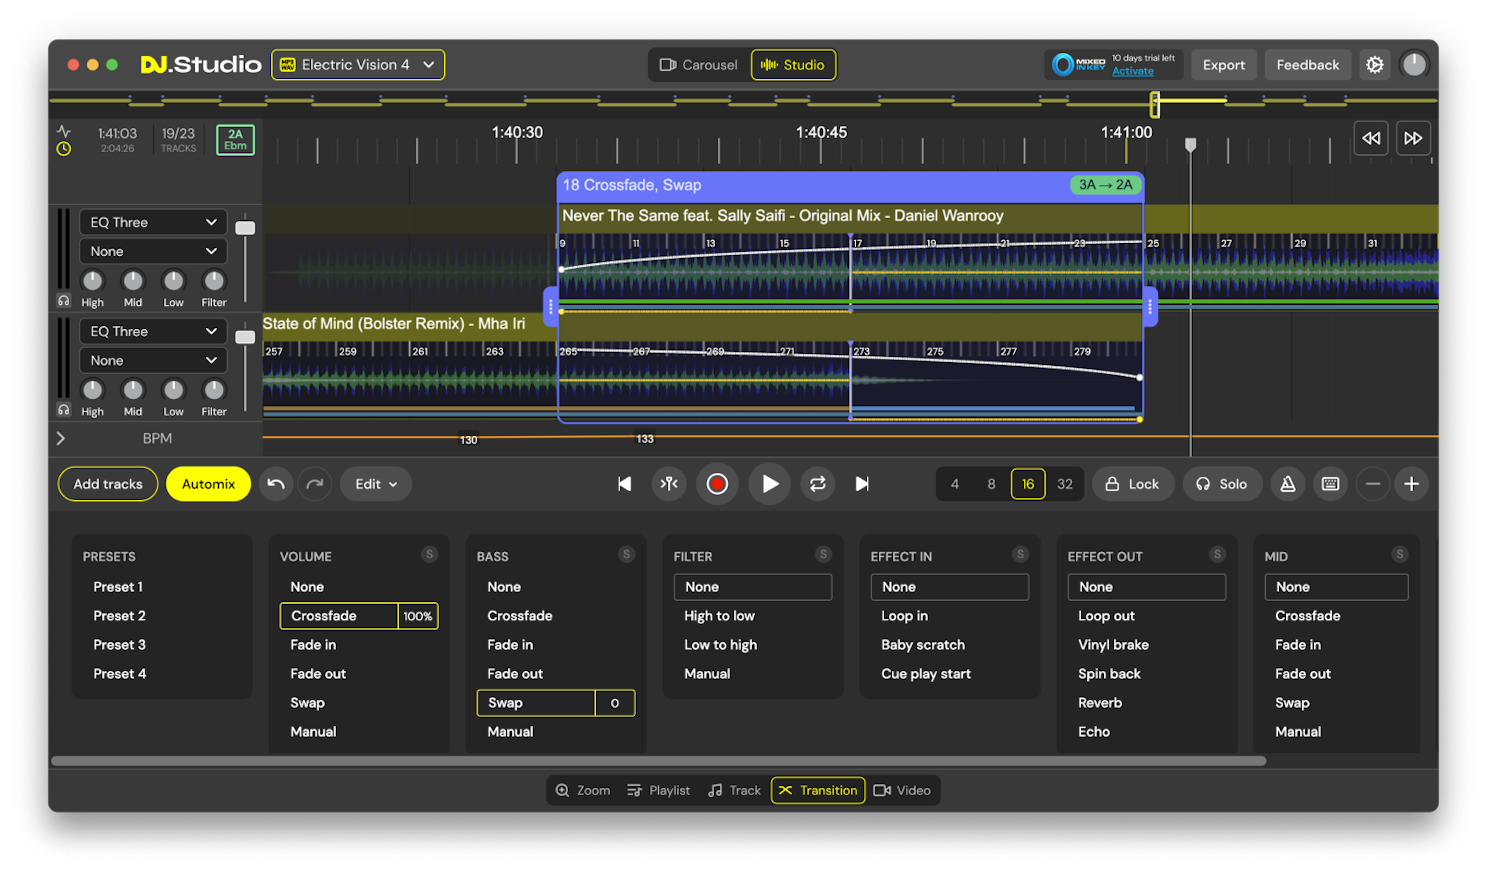 Mix and match automations with DJ.Studio's transition editor